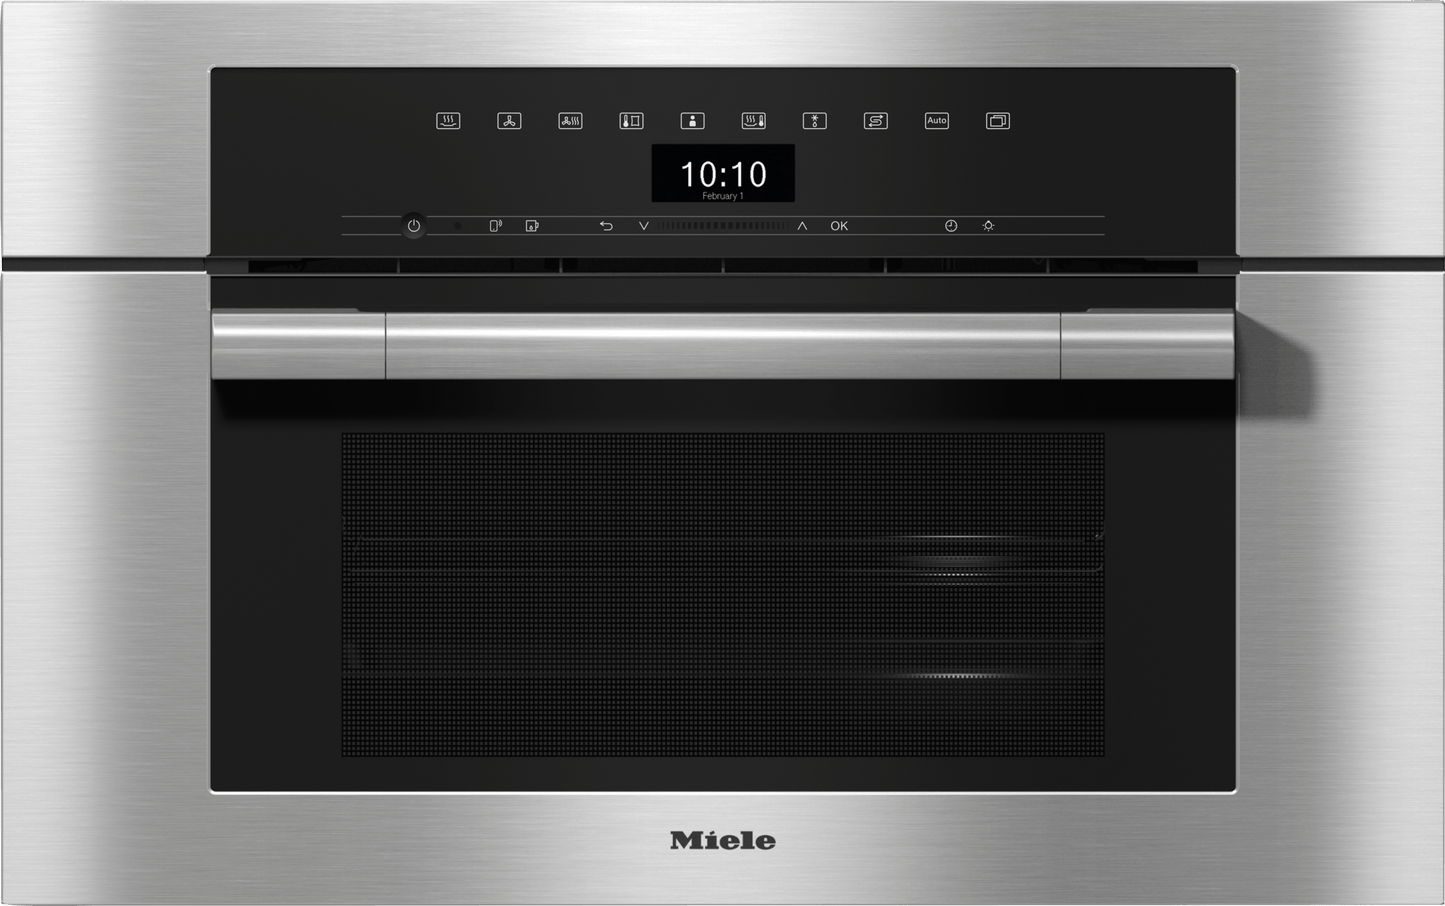 Miele DGC7370 STAINLESS STEEL  30" Compact Combi-Steam Oven Xl For Steam Cooking, Baking, Roasting With Networking + Brilliantlight.